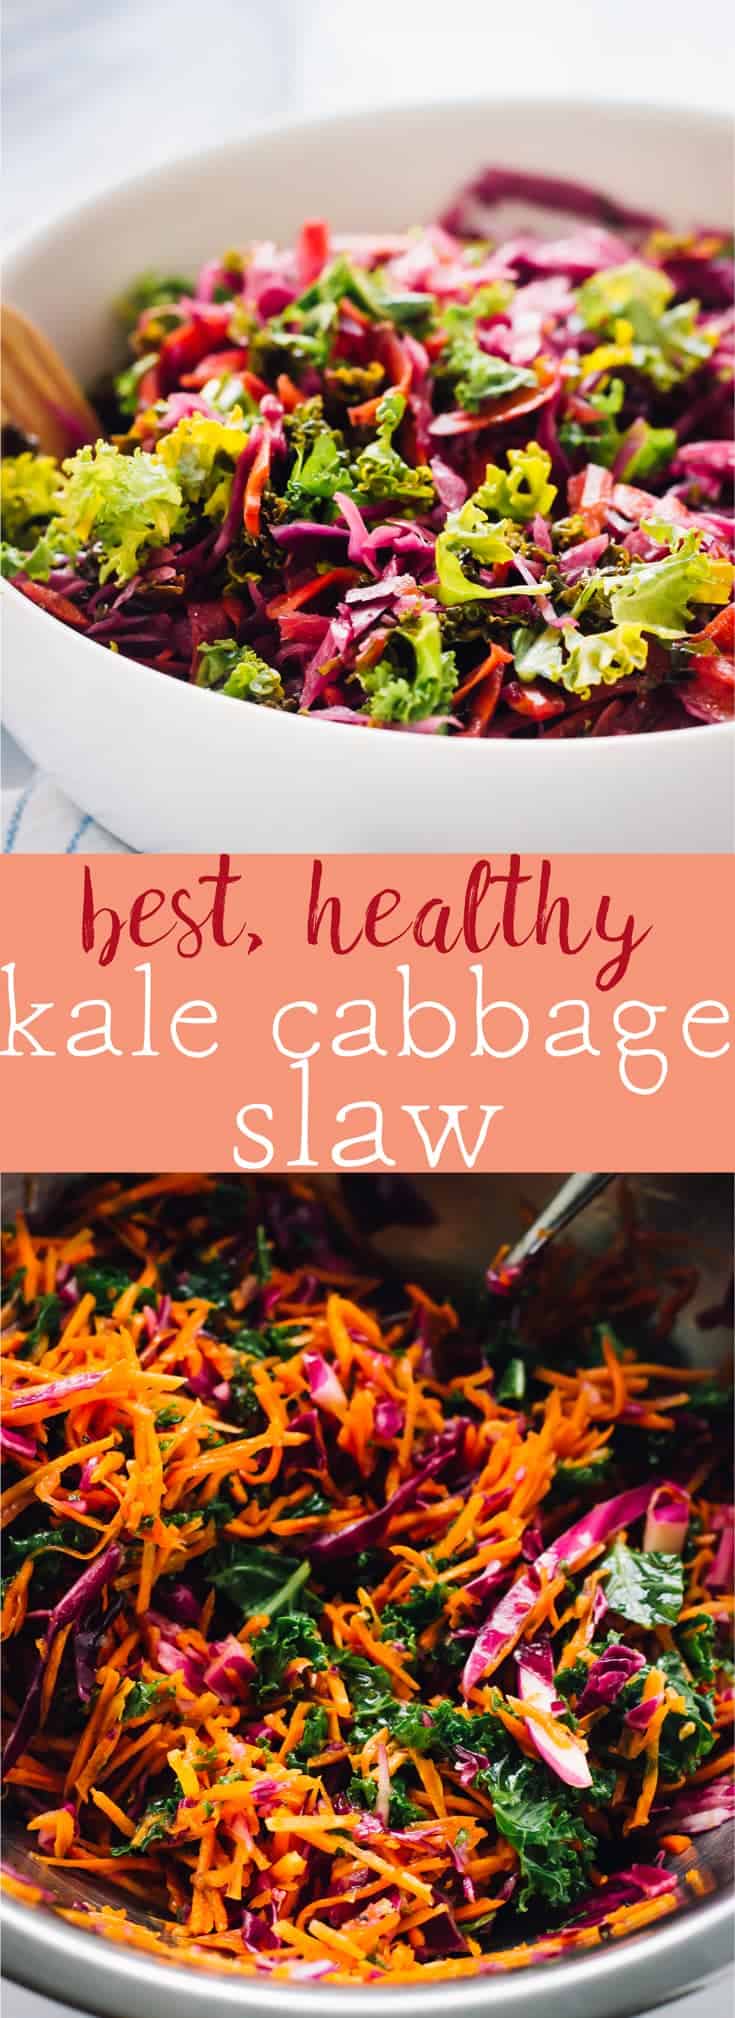 This is the best Kale Cabbage Slaw you'll ever try! It's healthy, just 5 minutes of prep and goes well with everything! via https://jessicainthekitchen.com